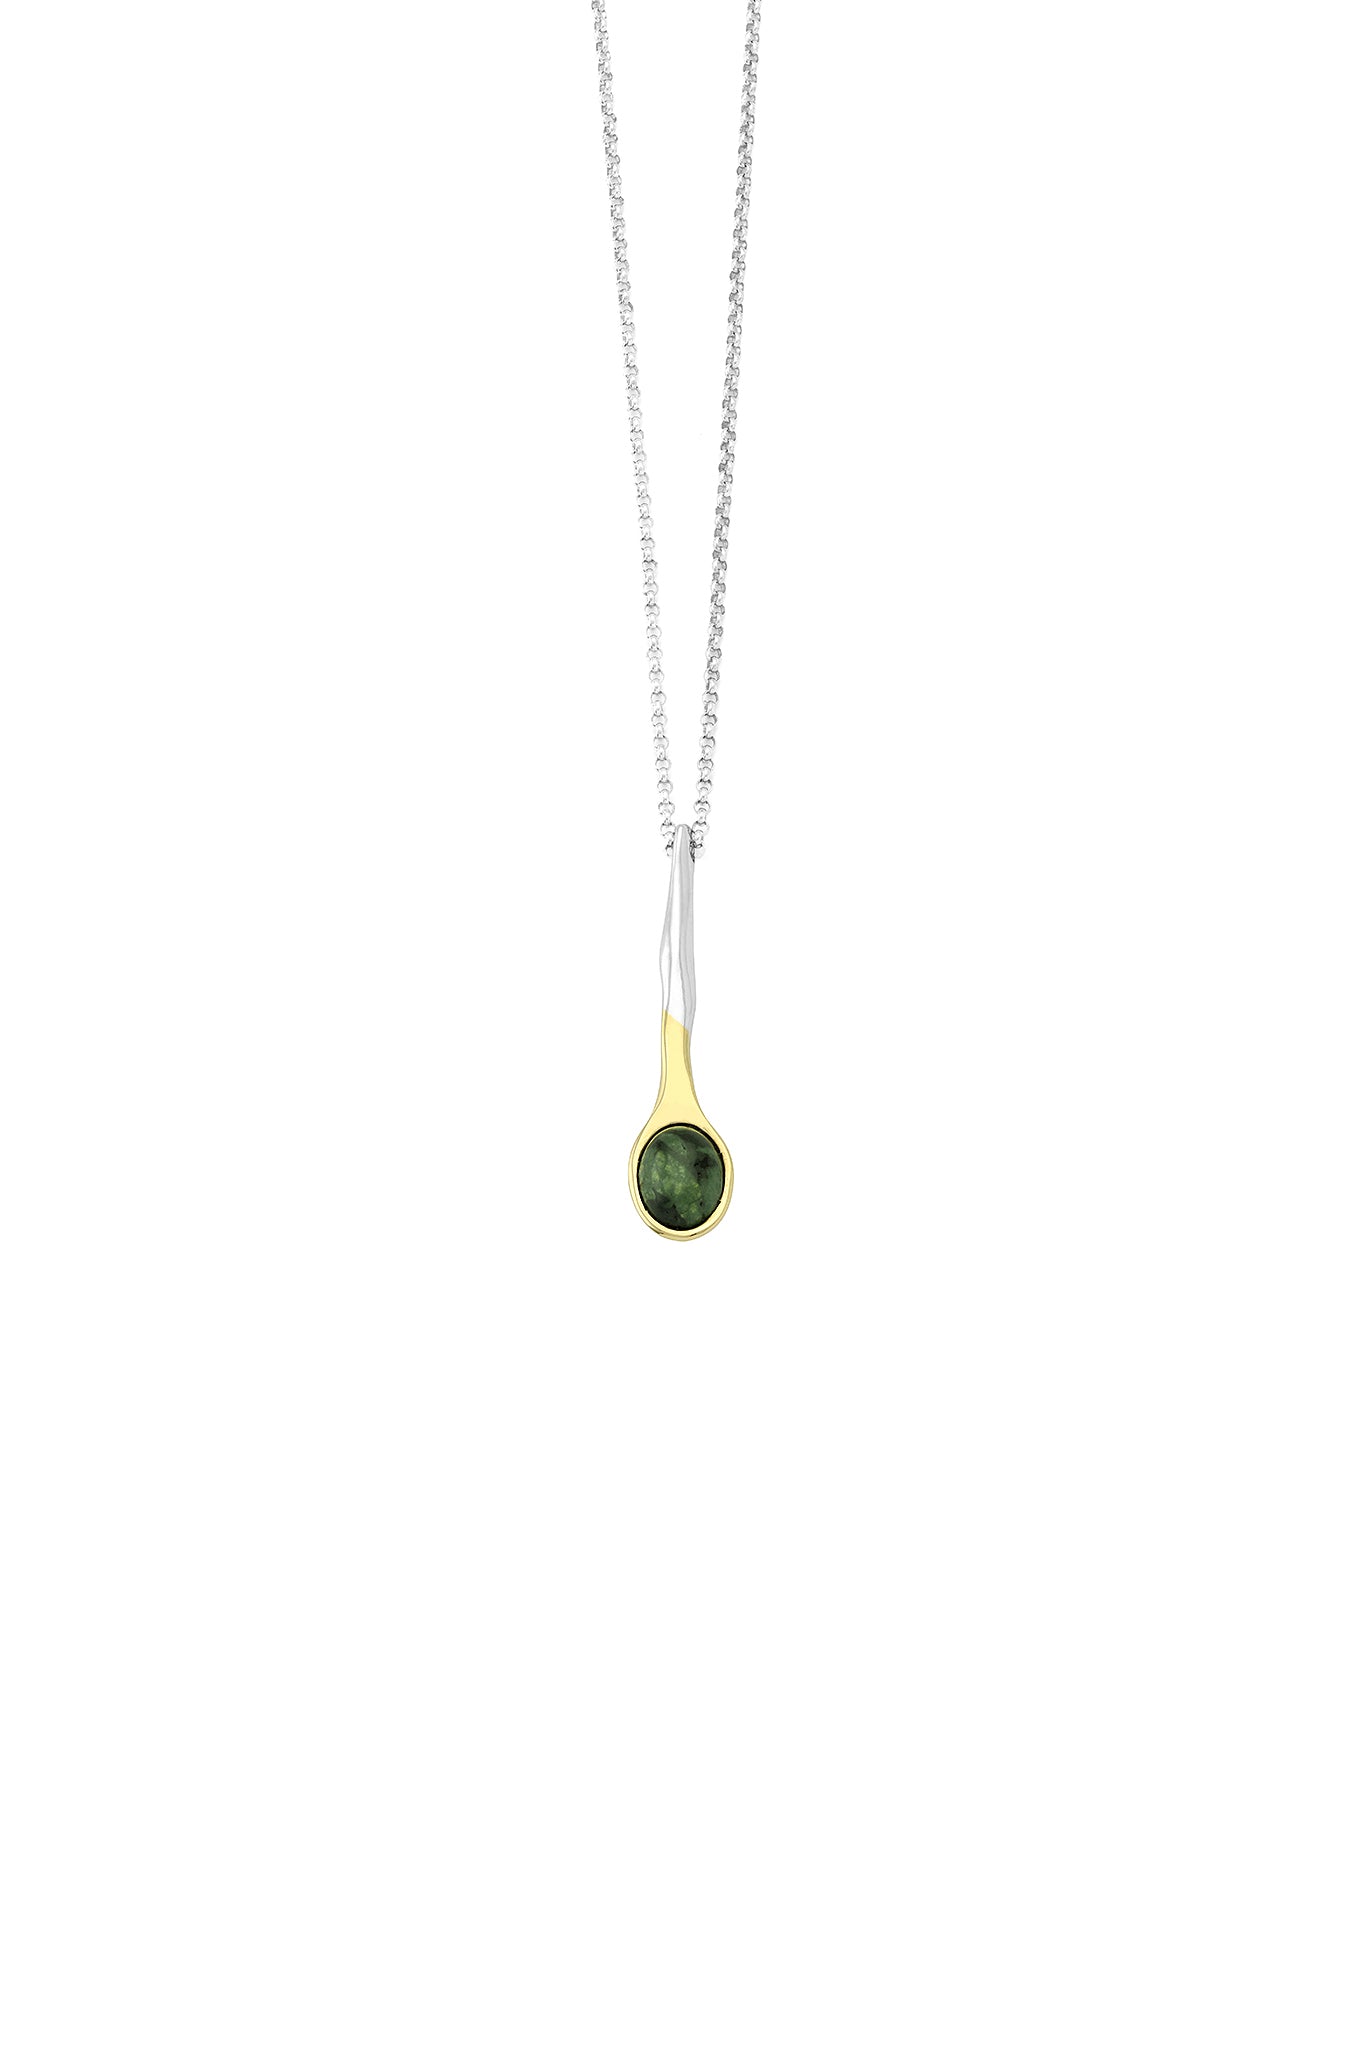 Short Sporos Stone Necklace 18k/925 with 925 chain